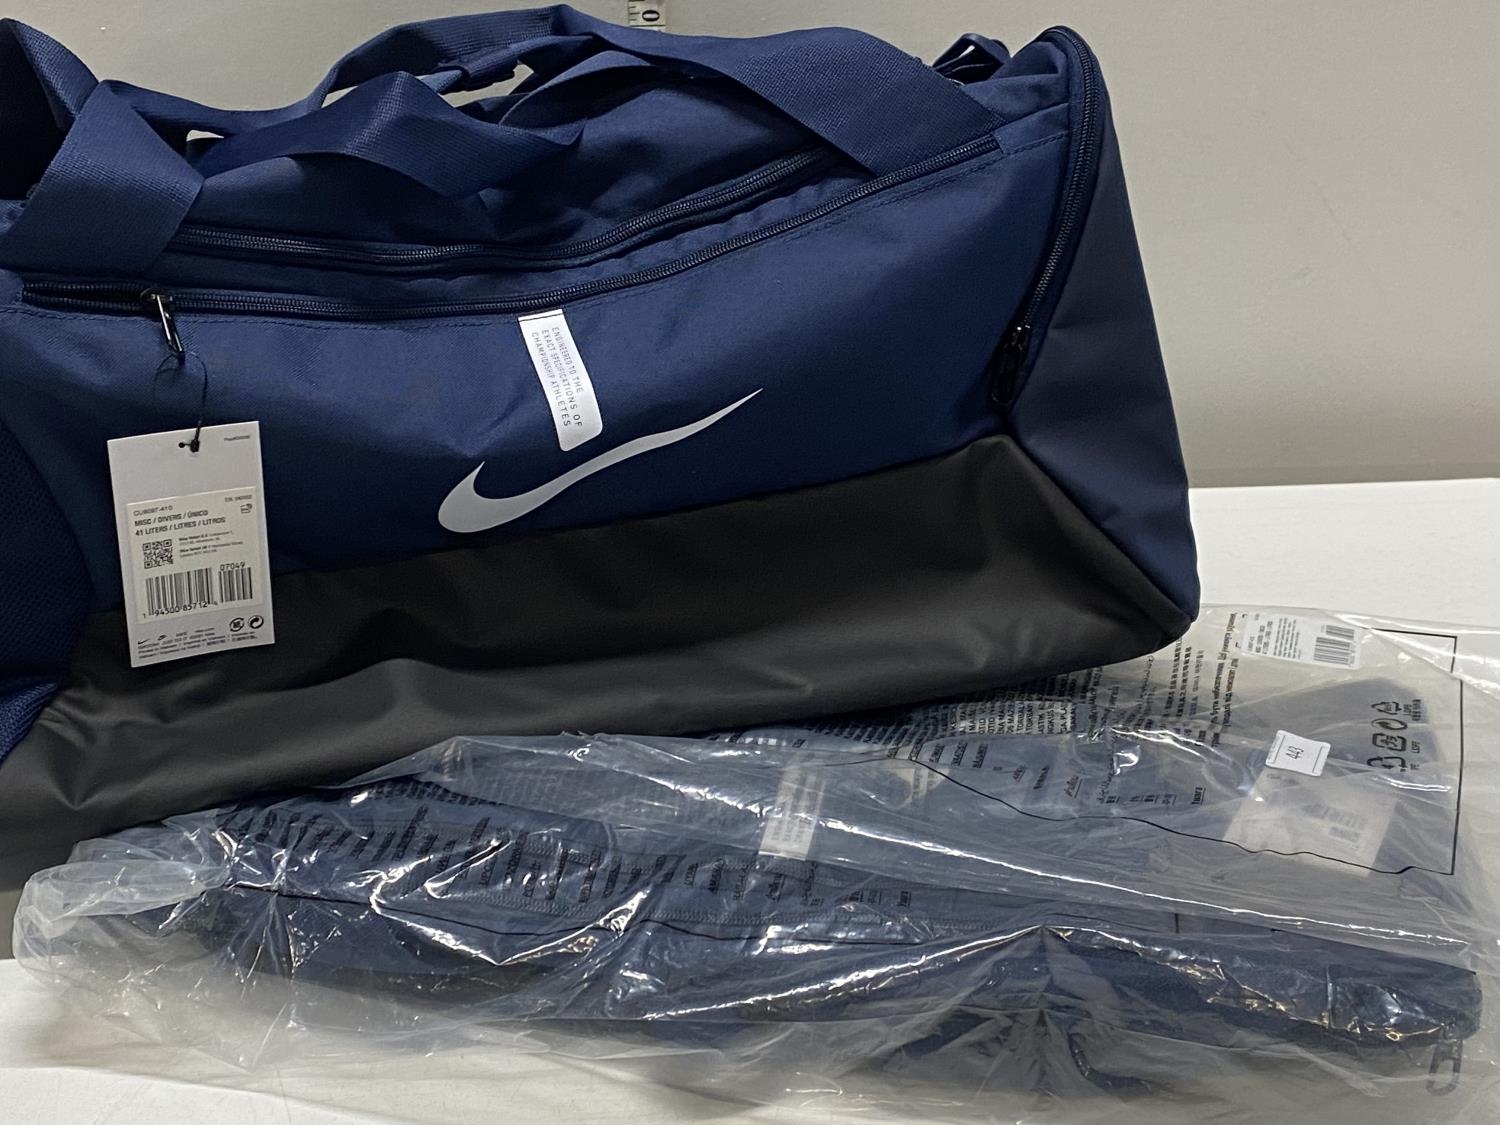 Two new Nike holdalls